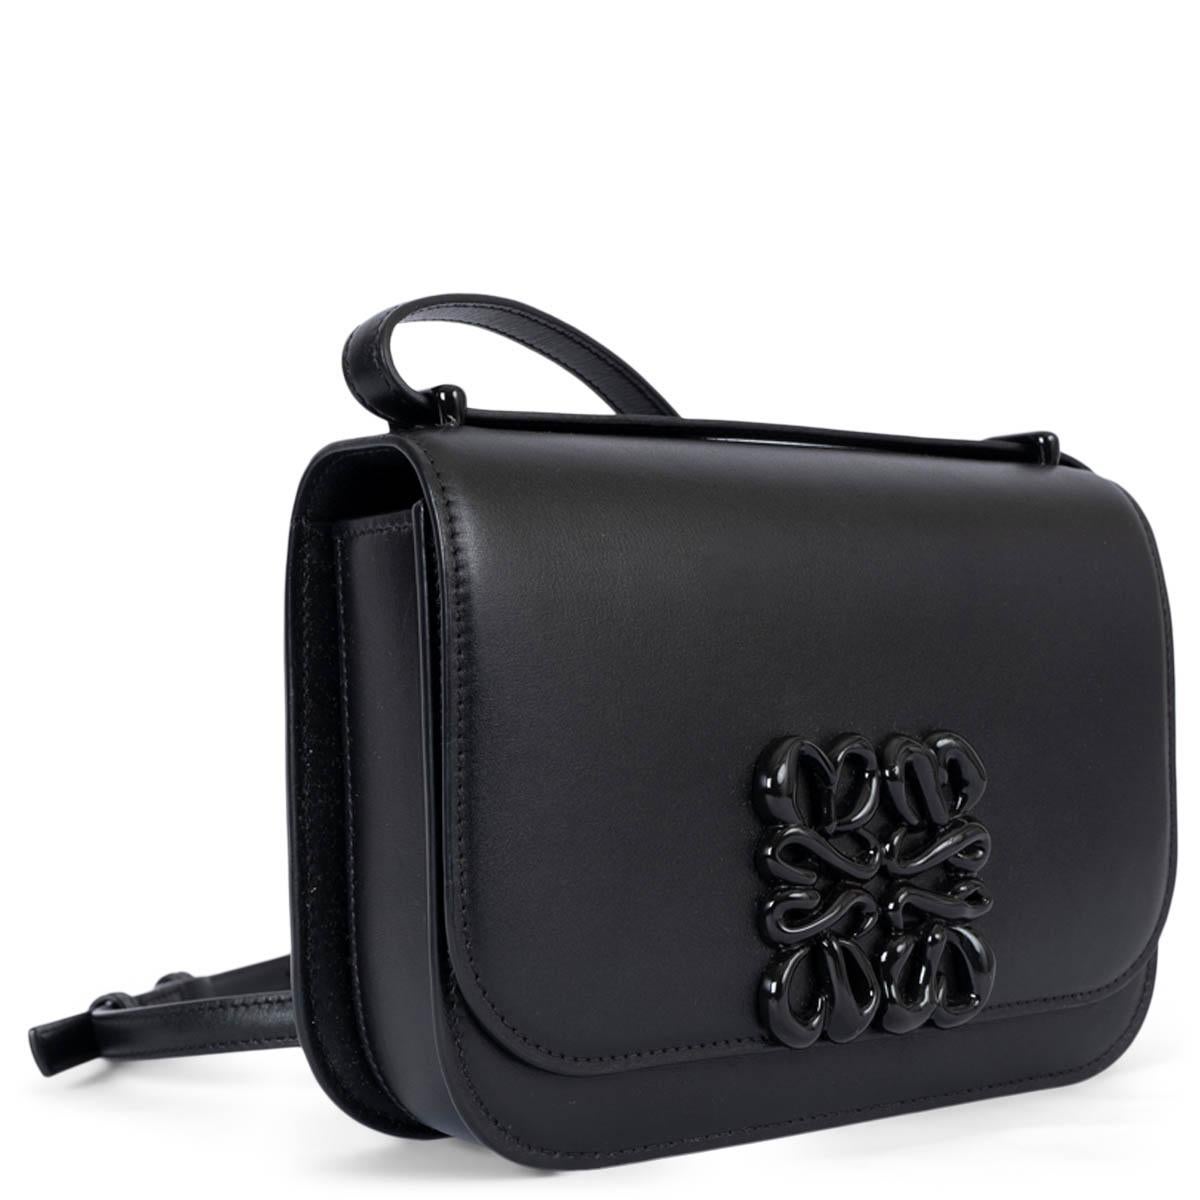 100% authentic Loewe Small Goya shoulder bag in black smooth calfskin with large classic magnetic Anagram closure. Limited edition. Lined in black calfskin with three internal pockets including one press stud pocket and one external pocket. Has been